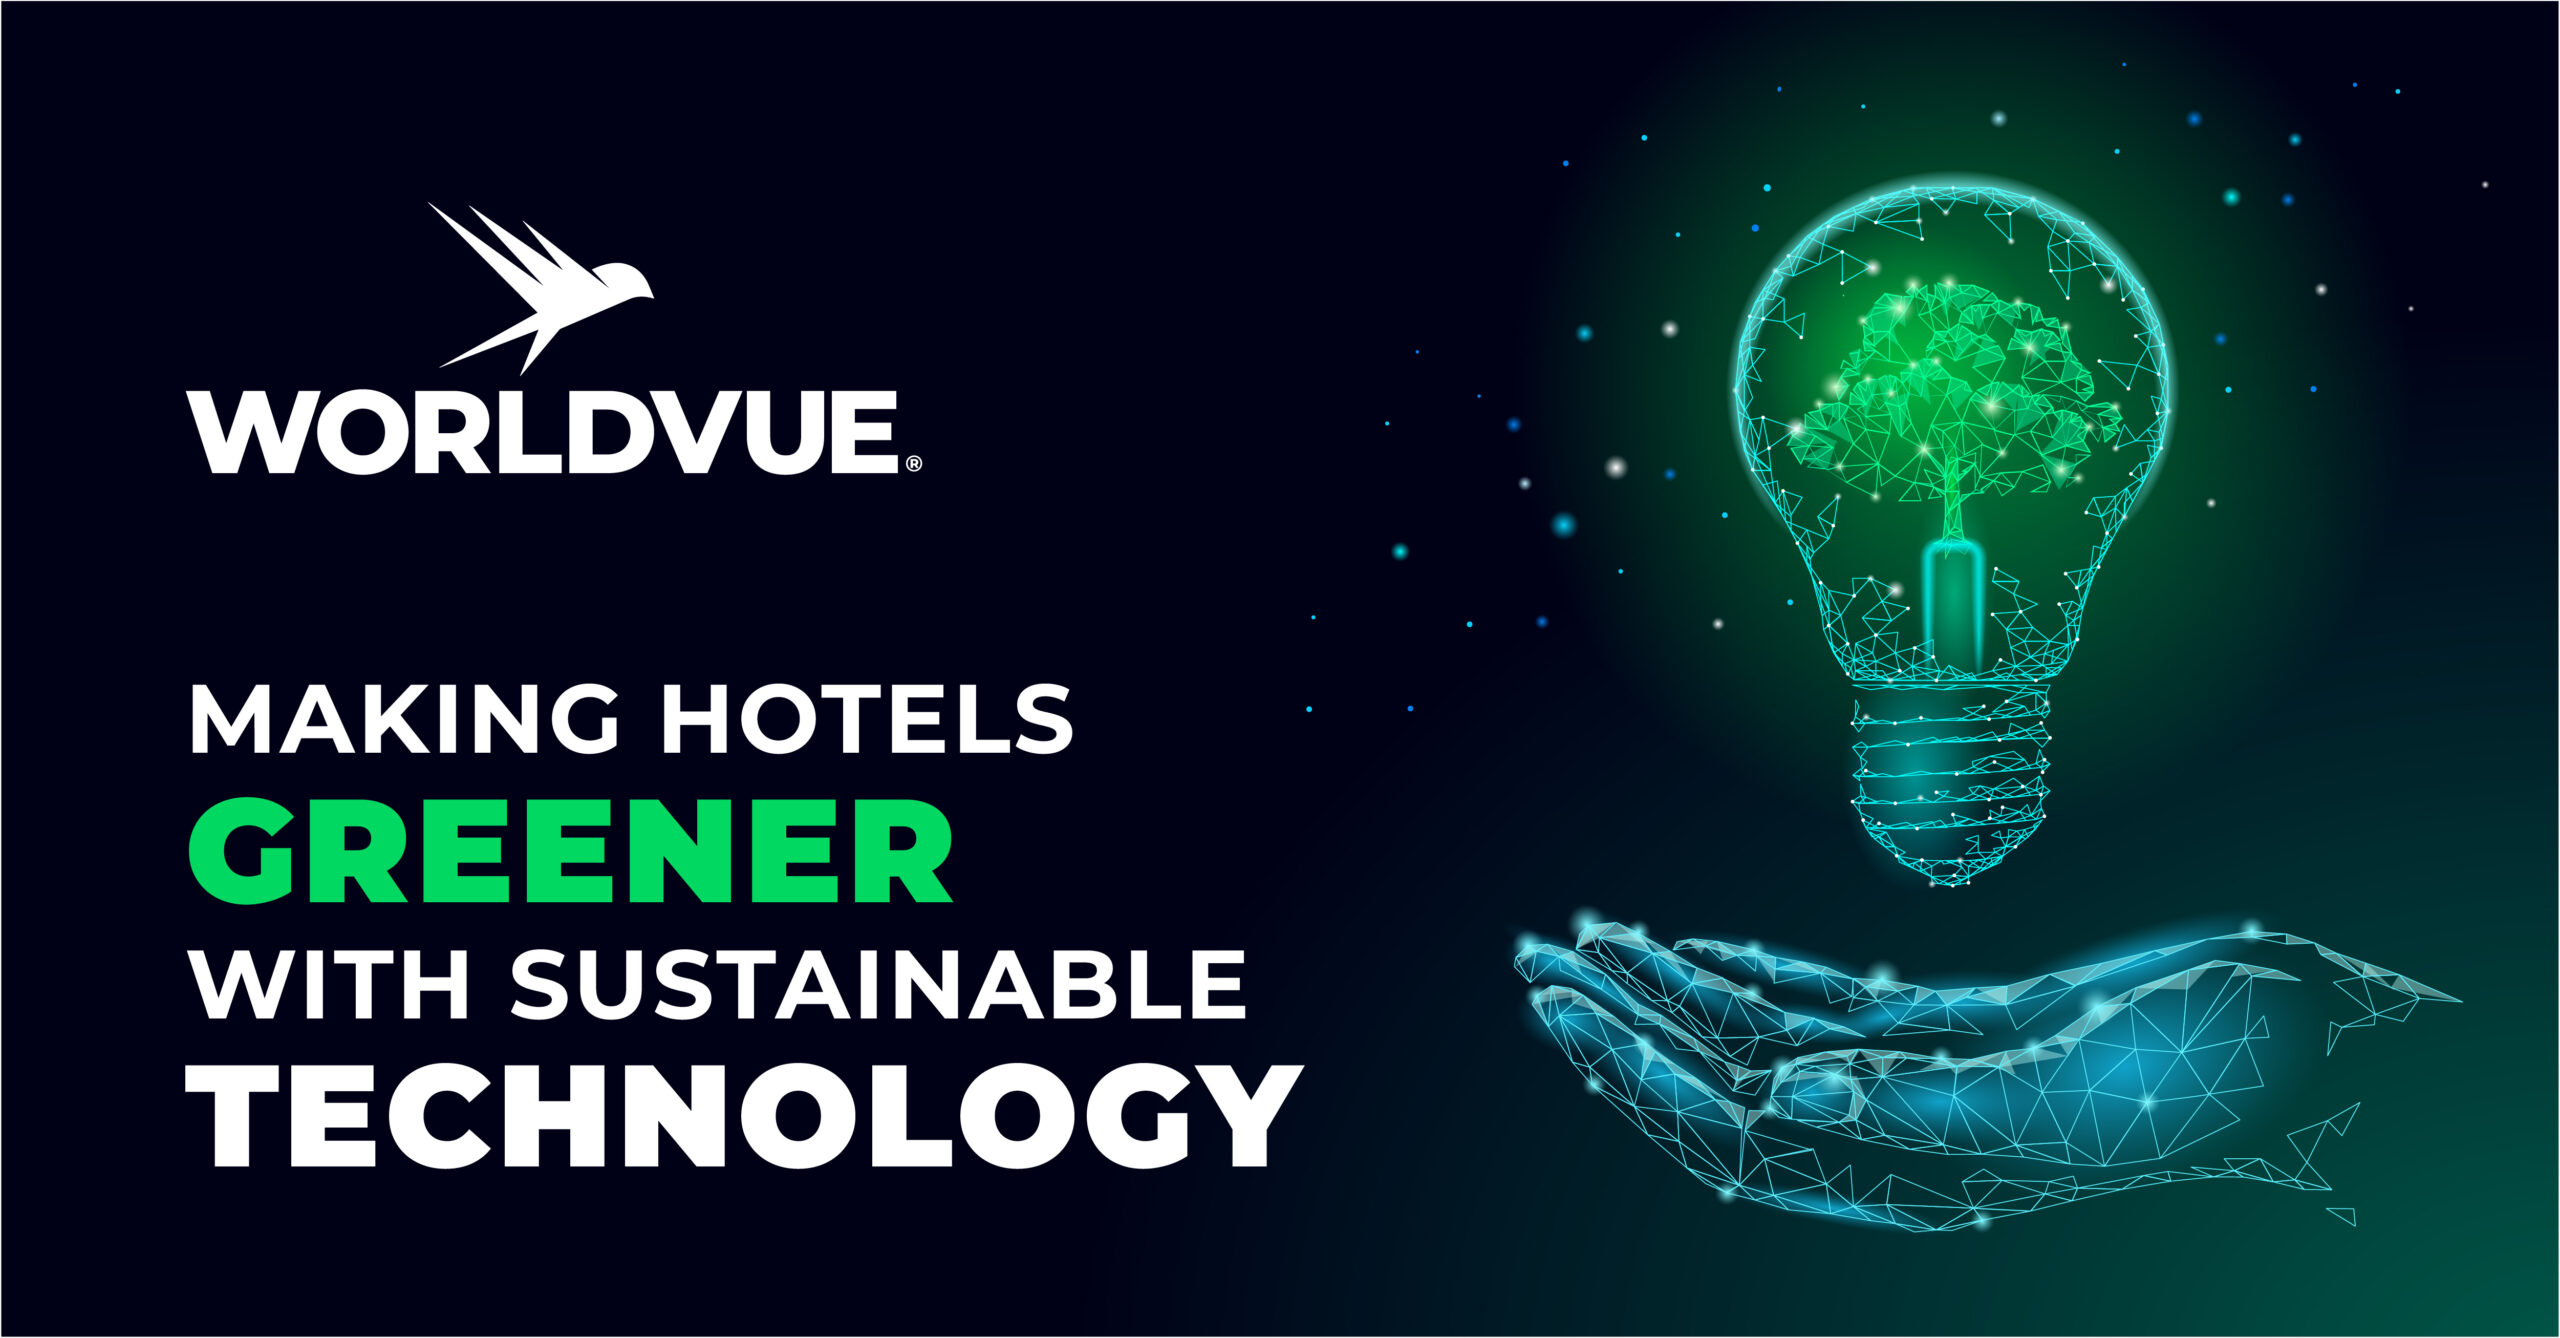 black background with WorldVue logo, text saying Making Hotels Greener with Sustainable Technology, and stylized hand suggesting a network with a lightbulb floating above it that has a tree in it